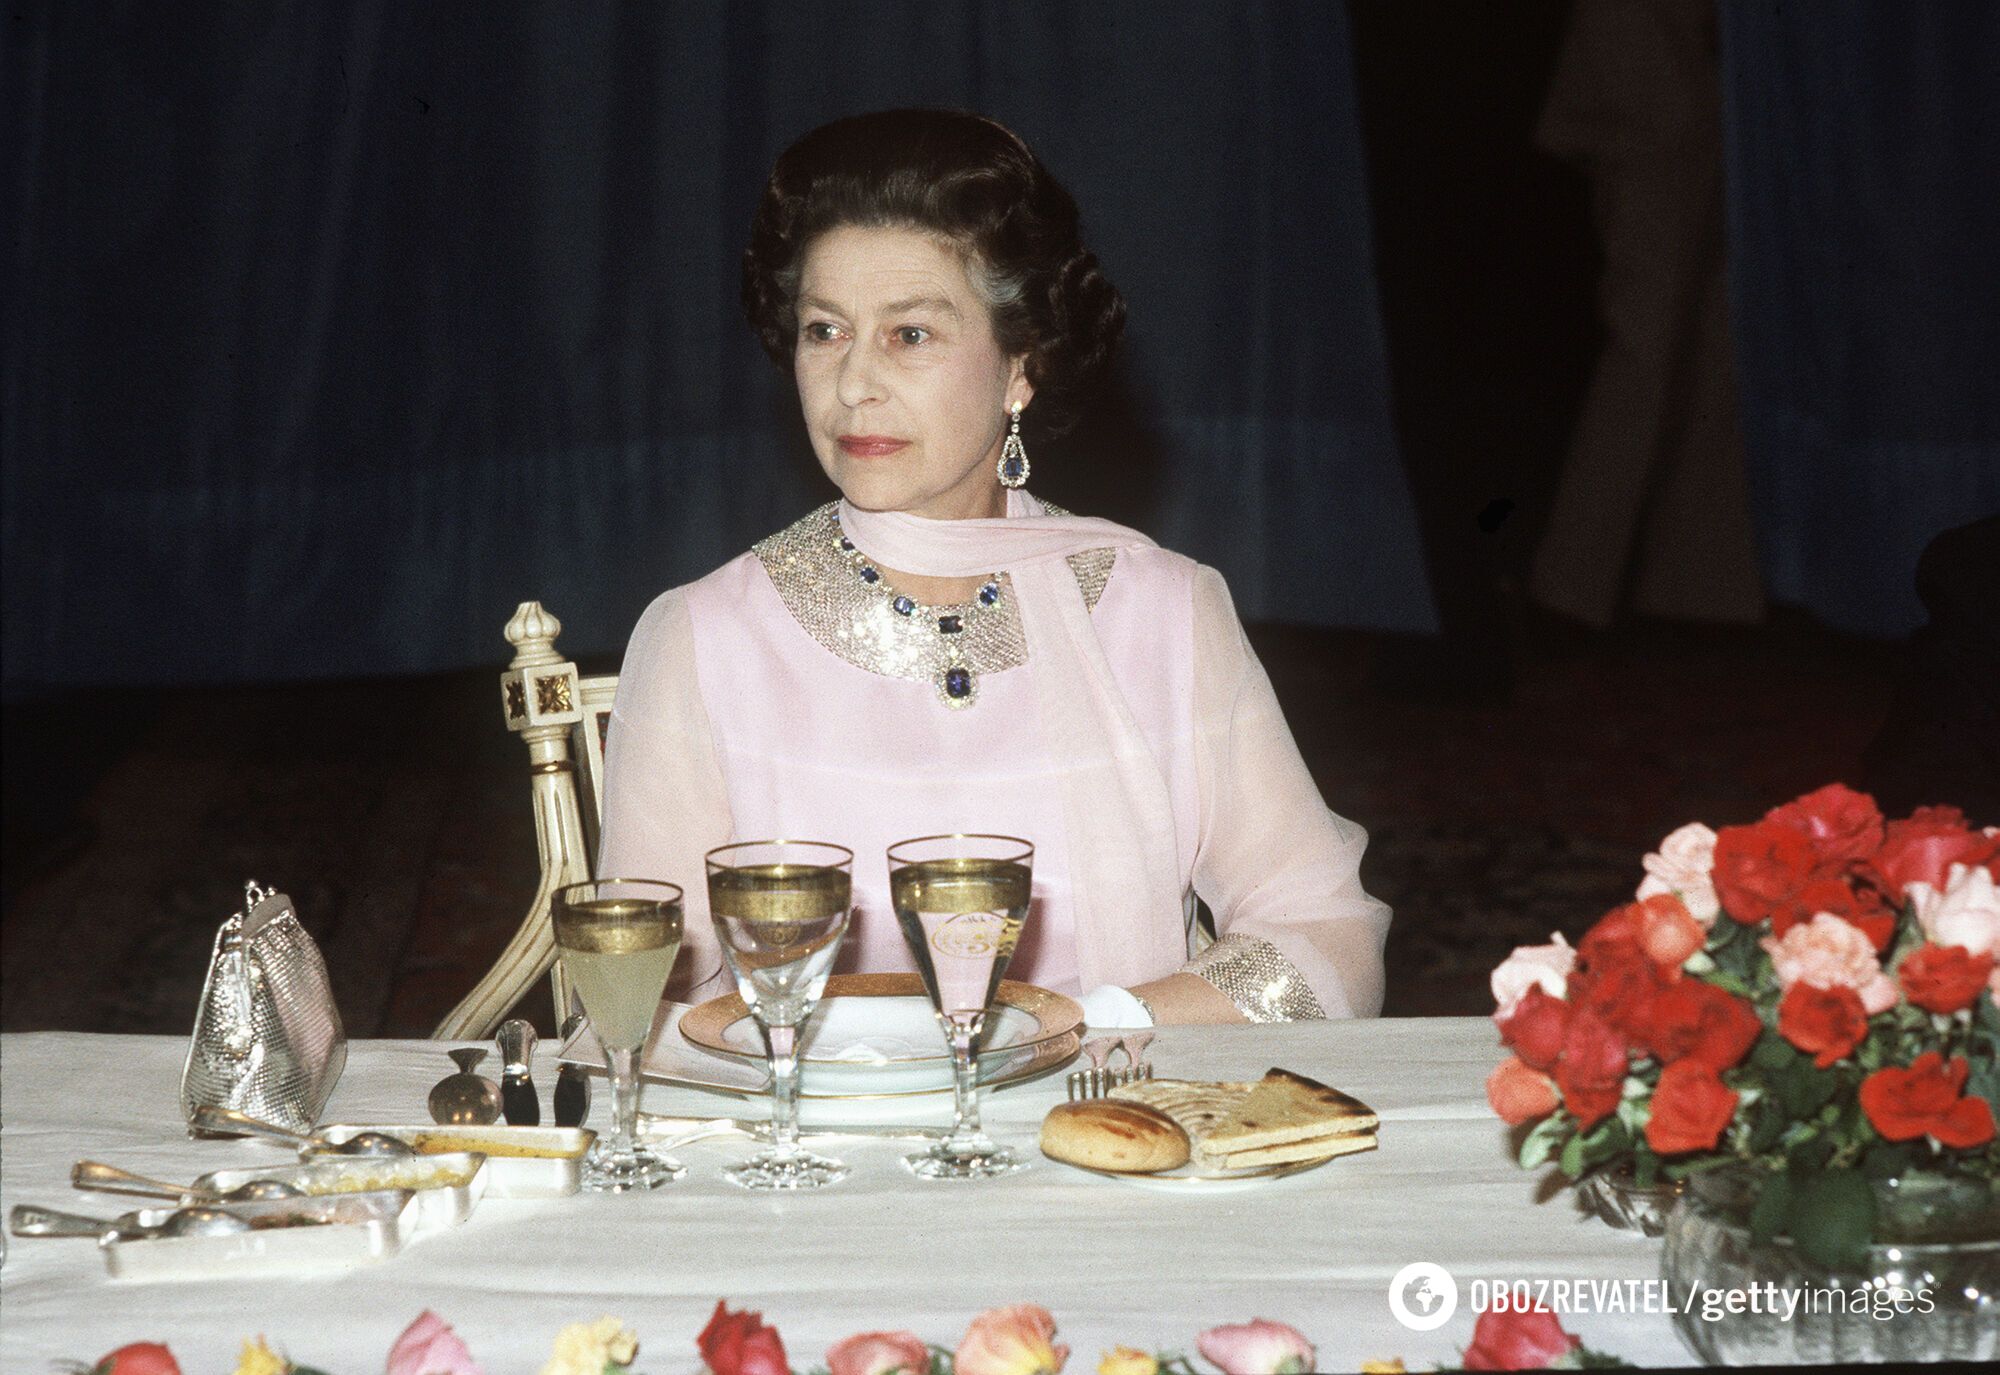 No potatoes, rice or pasta: royal chef reveals what the late Elizabeth II asked not to serve